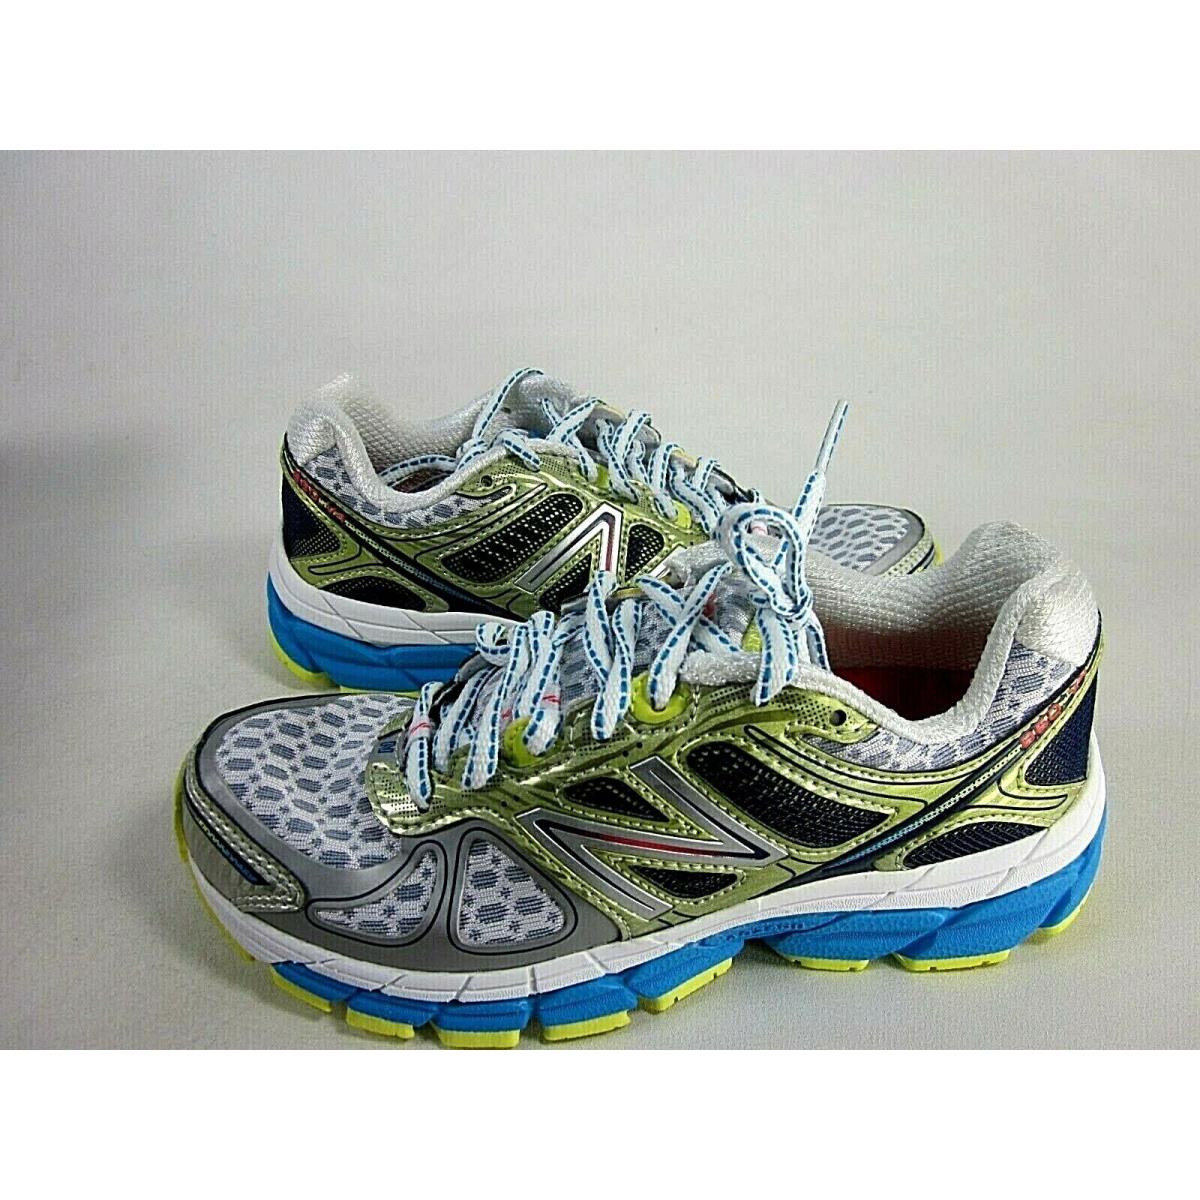 New Balance Multicolor Womens Running Shoes Size 5.5 2A Narrow